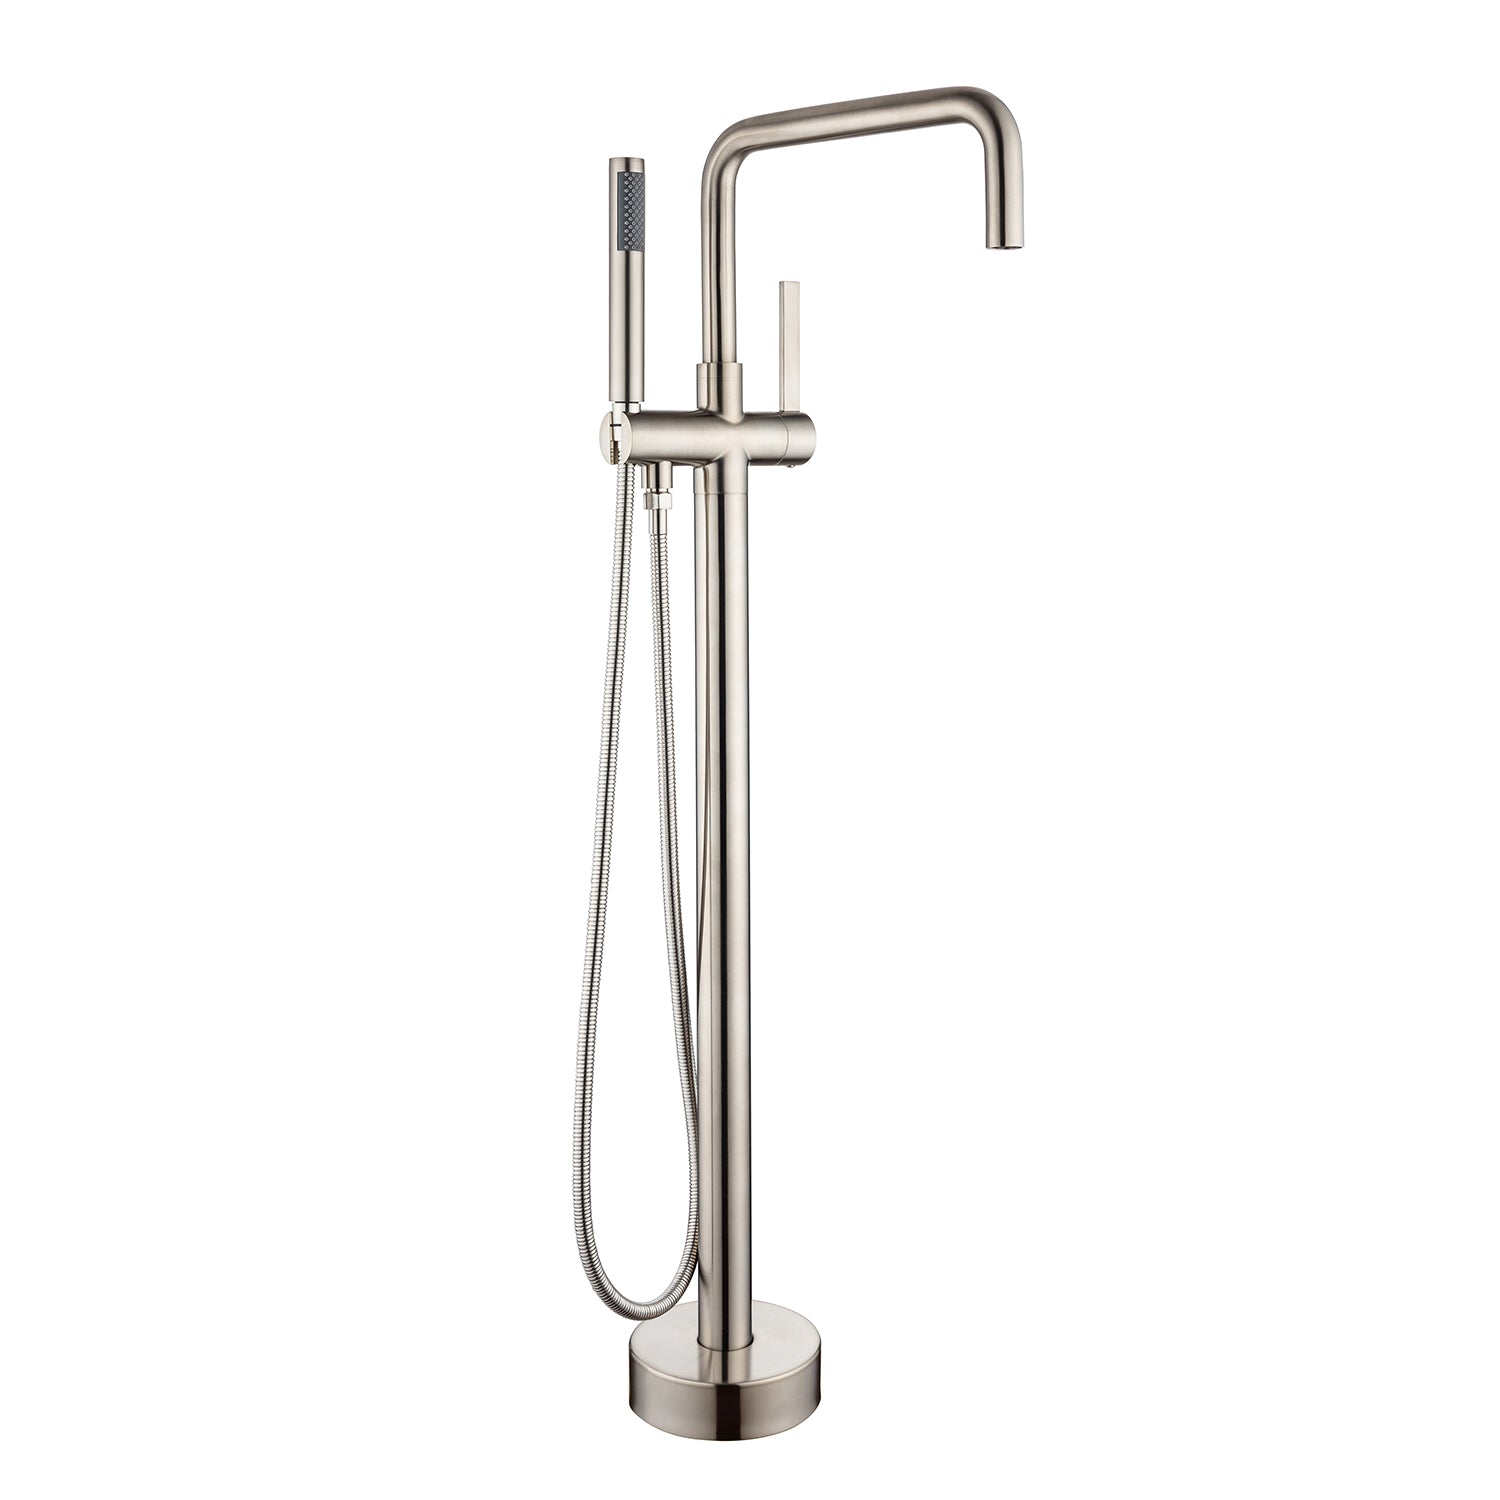 Single Handle Floor Mounted Clawfoot Tub Faucet with Handheld Shower RX8008